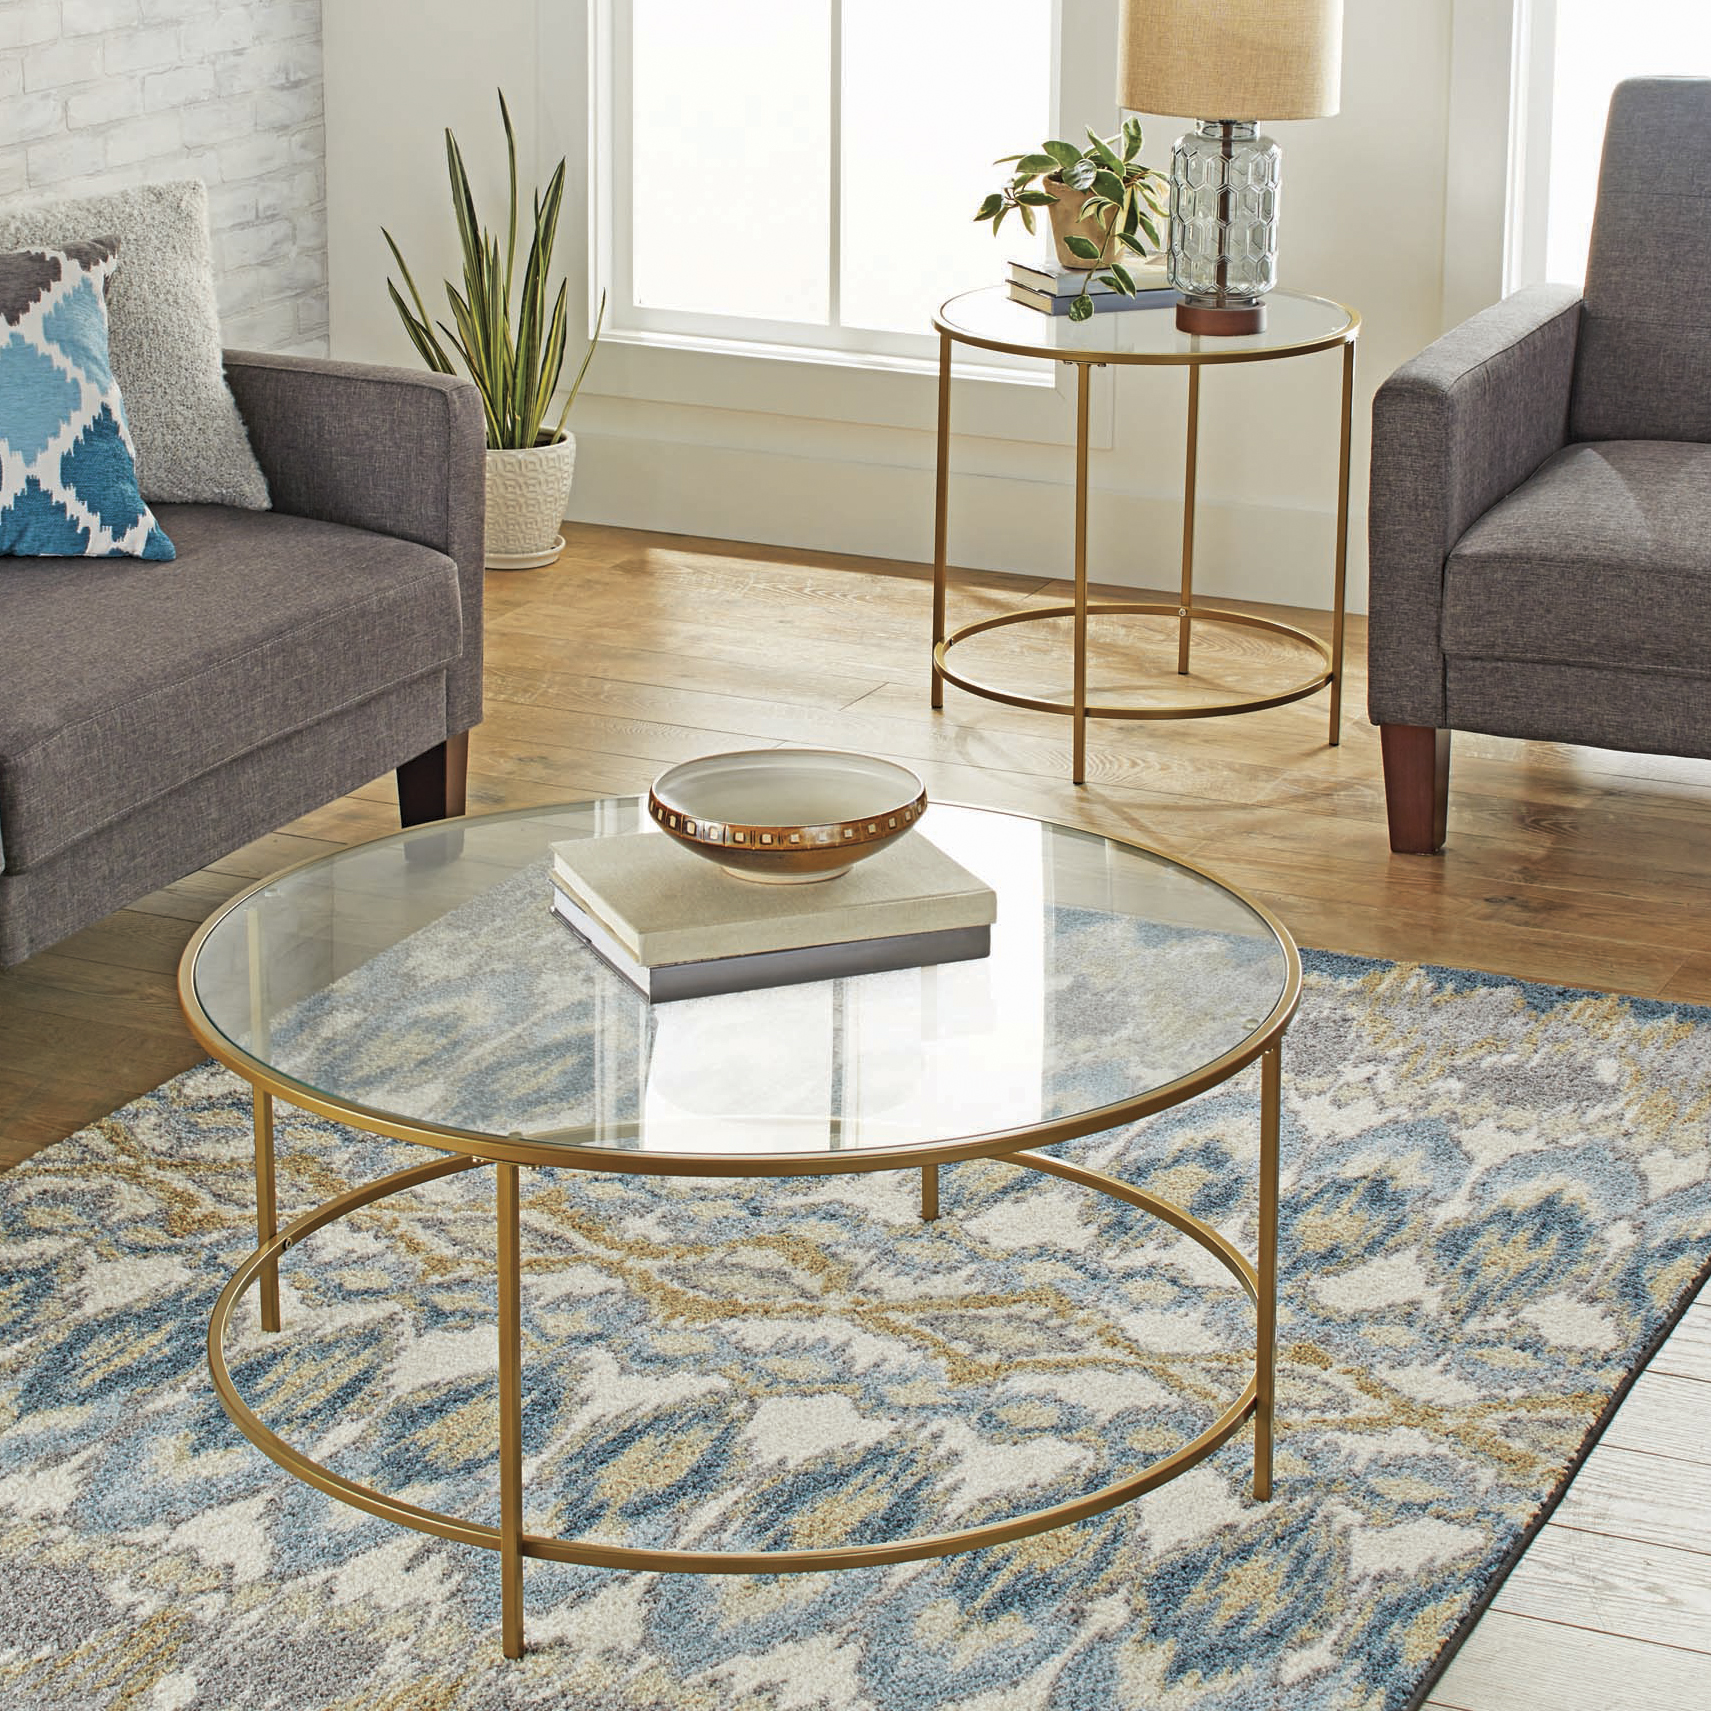 Better Homes & Gardens Nola Coffee Table, Gold Finish - image 3 of 10